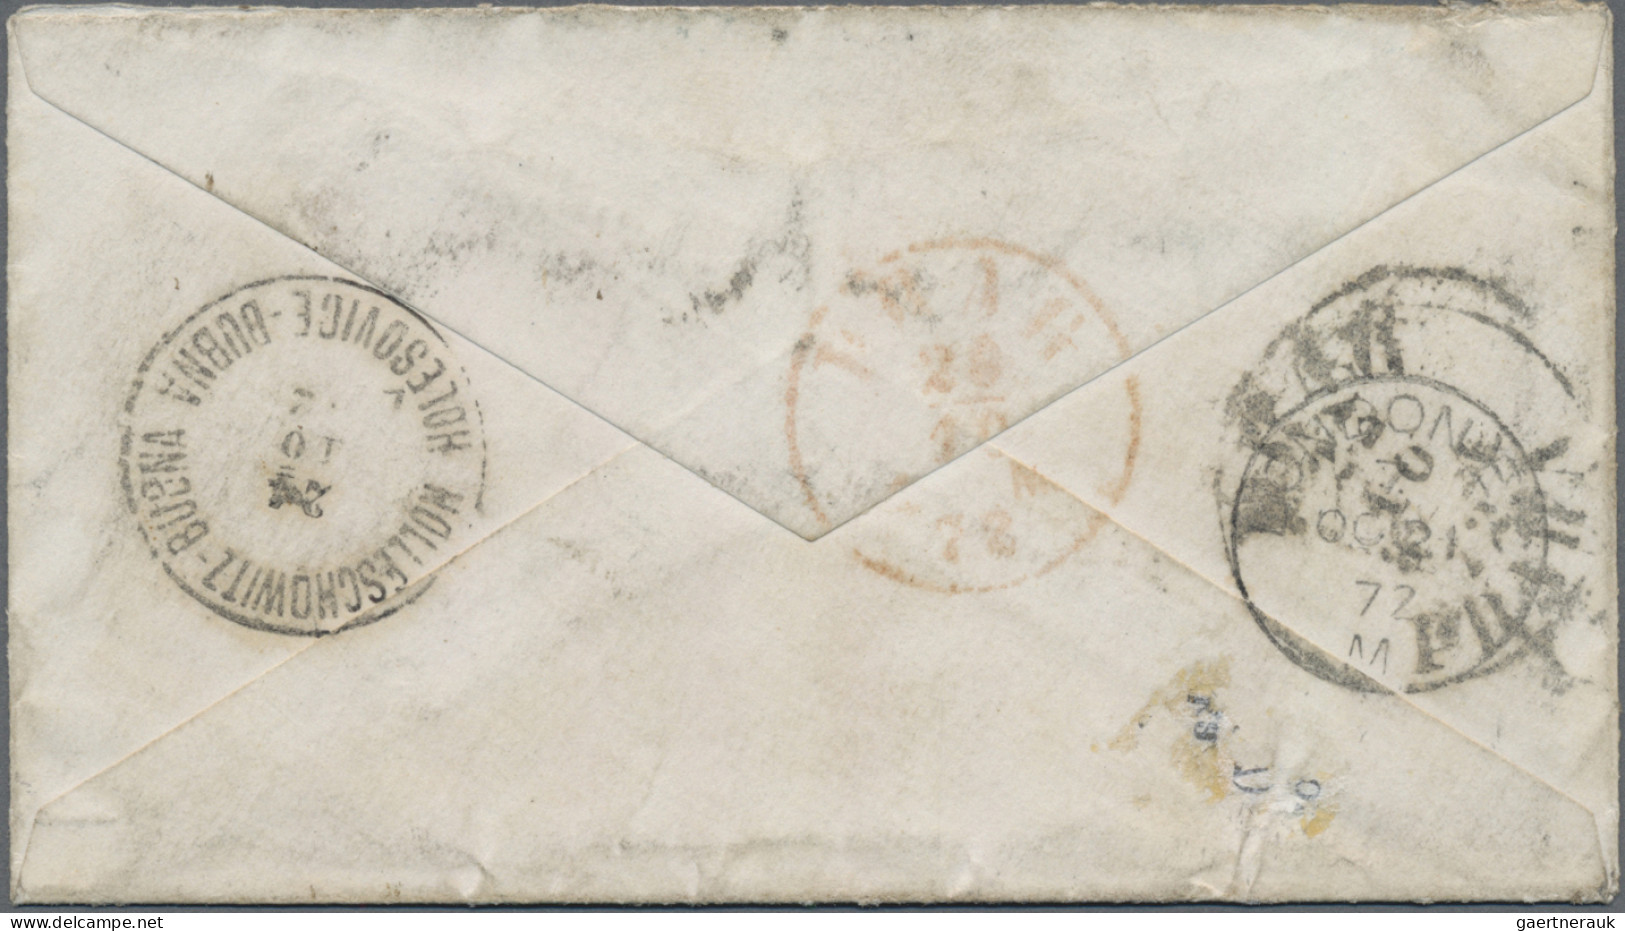 Great Britain: 1872 Stampless Cover From London To Bubna, Redirected To Bubenc A - Brieven En Documenten